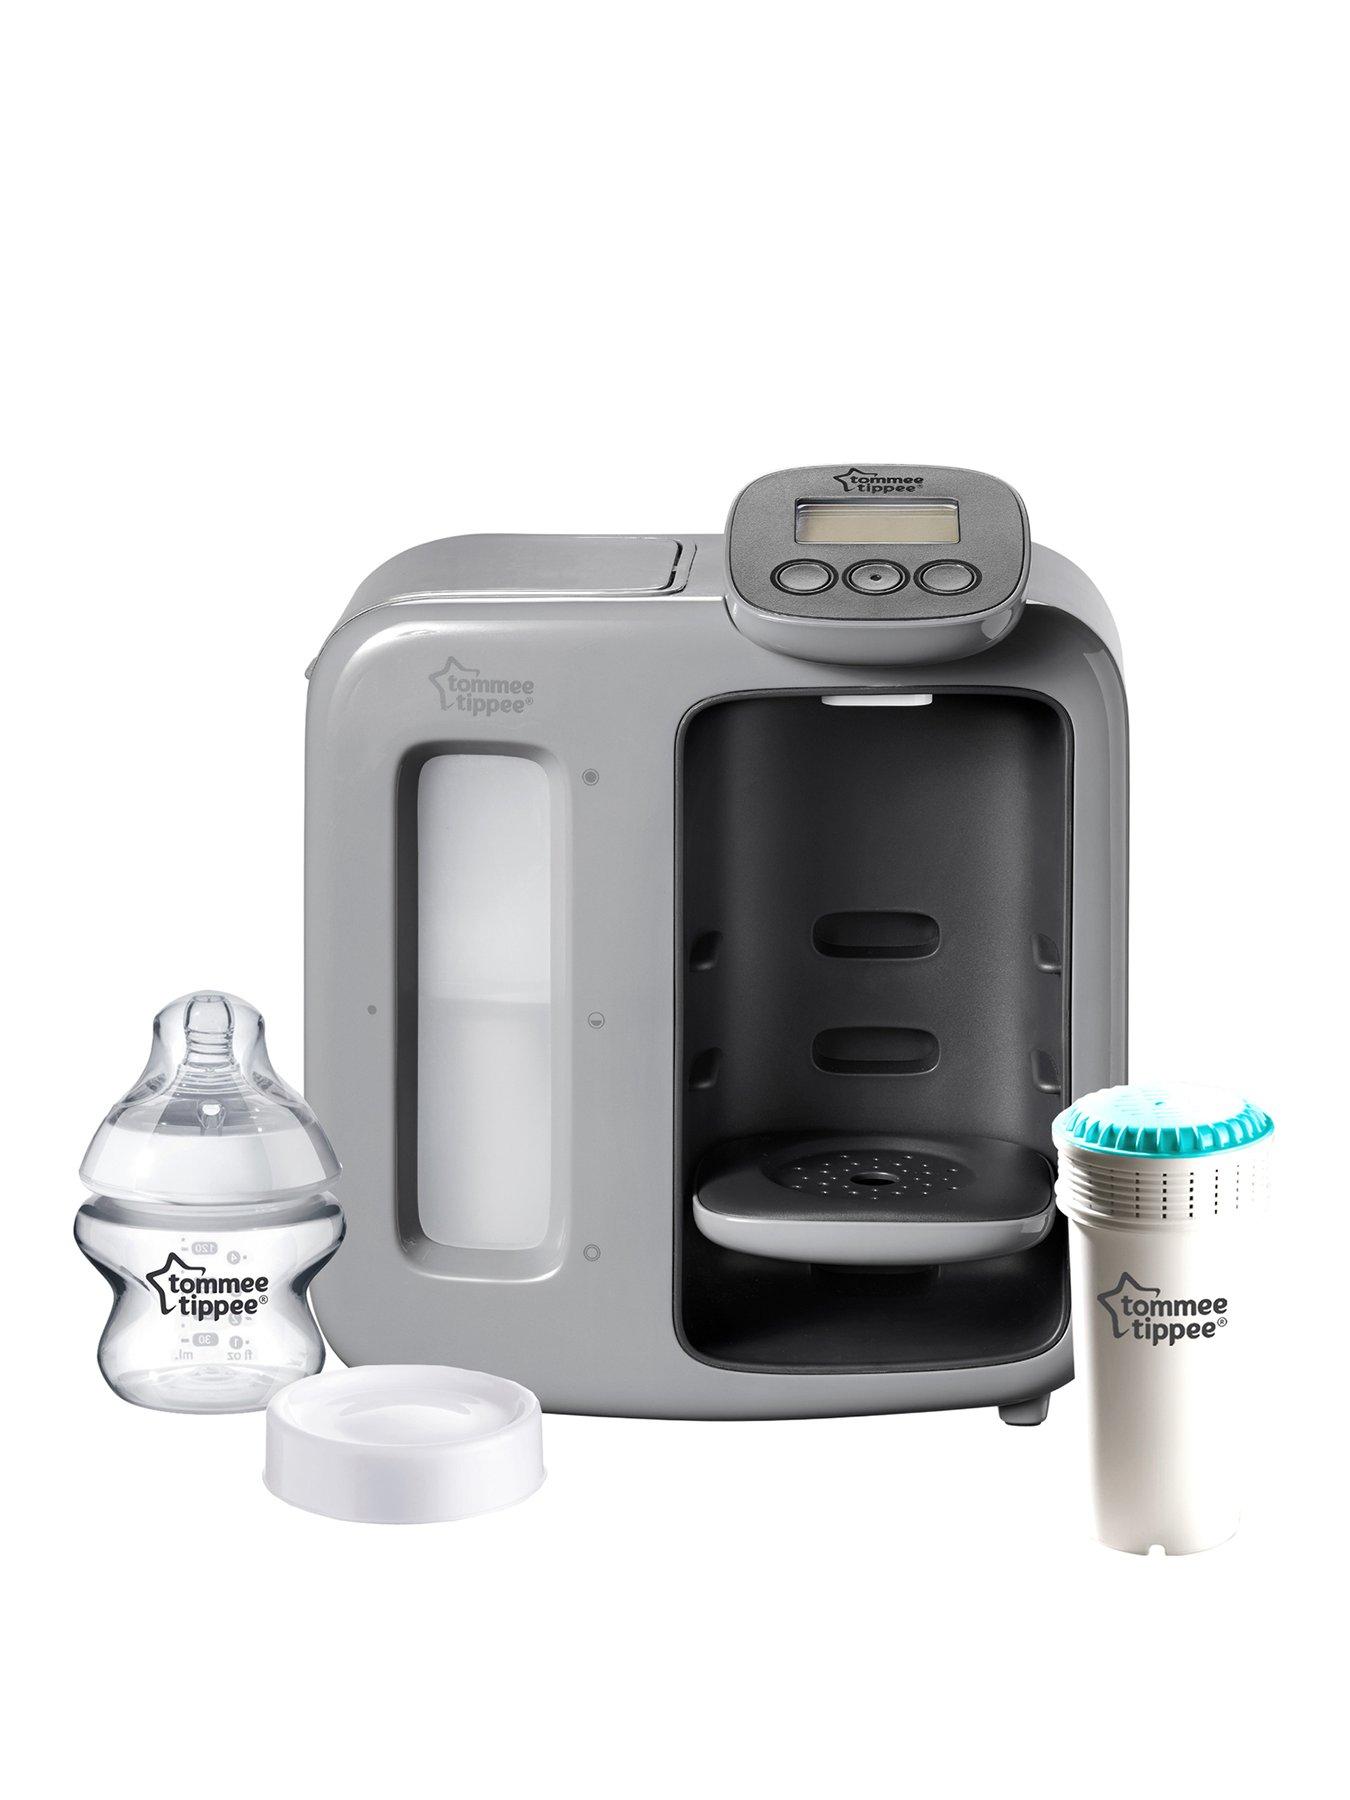 difference between tommee tippee prep machines